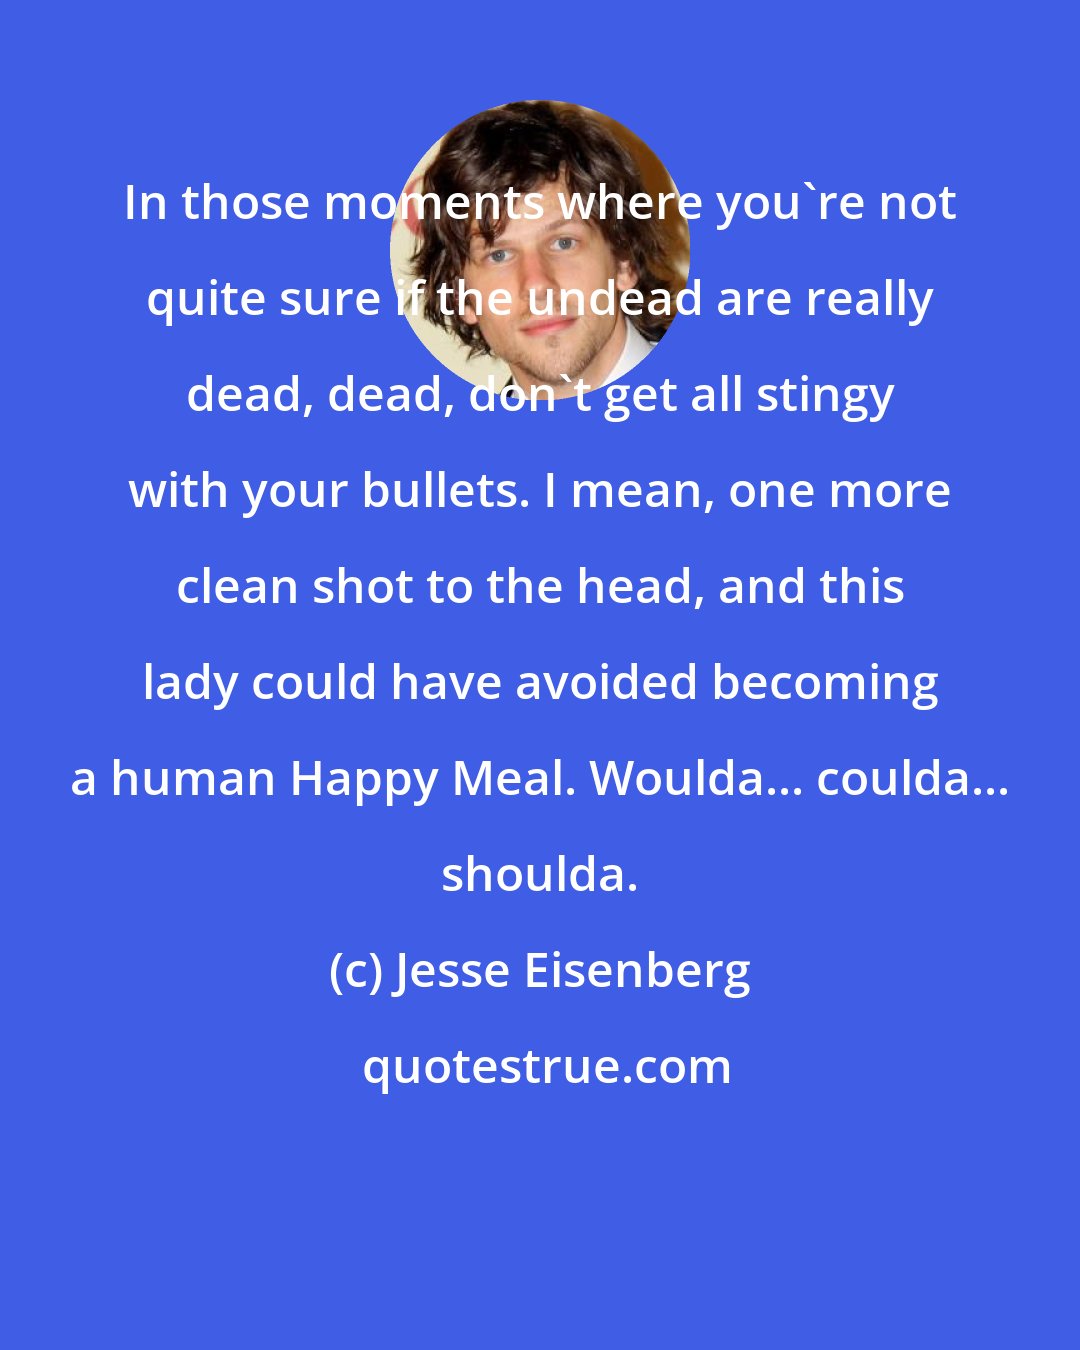 Jesse Eisenberg: In those moments where you're not quite sure if the undead are really dead, dead, don't get all stingy with your bullets. I mean, one more clean shot to the head, and this lady could have avoided becoming a human Happy Meal. Woulda... coulda... shoulda.